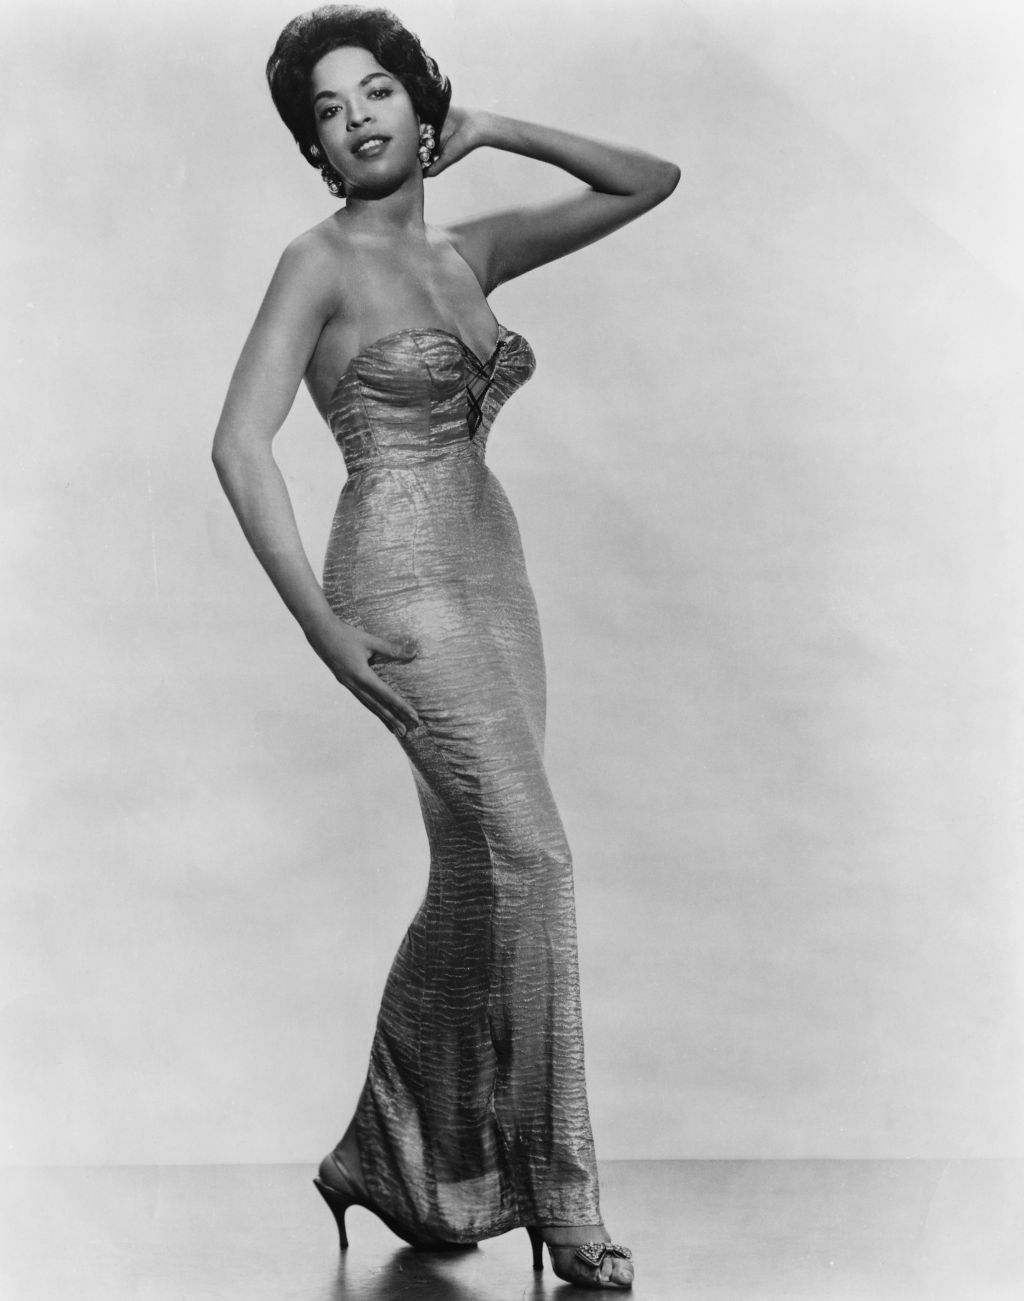 Singer and Actress Della Reese